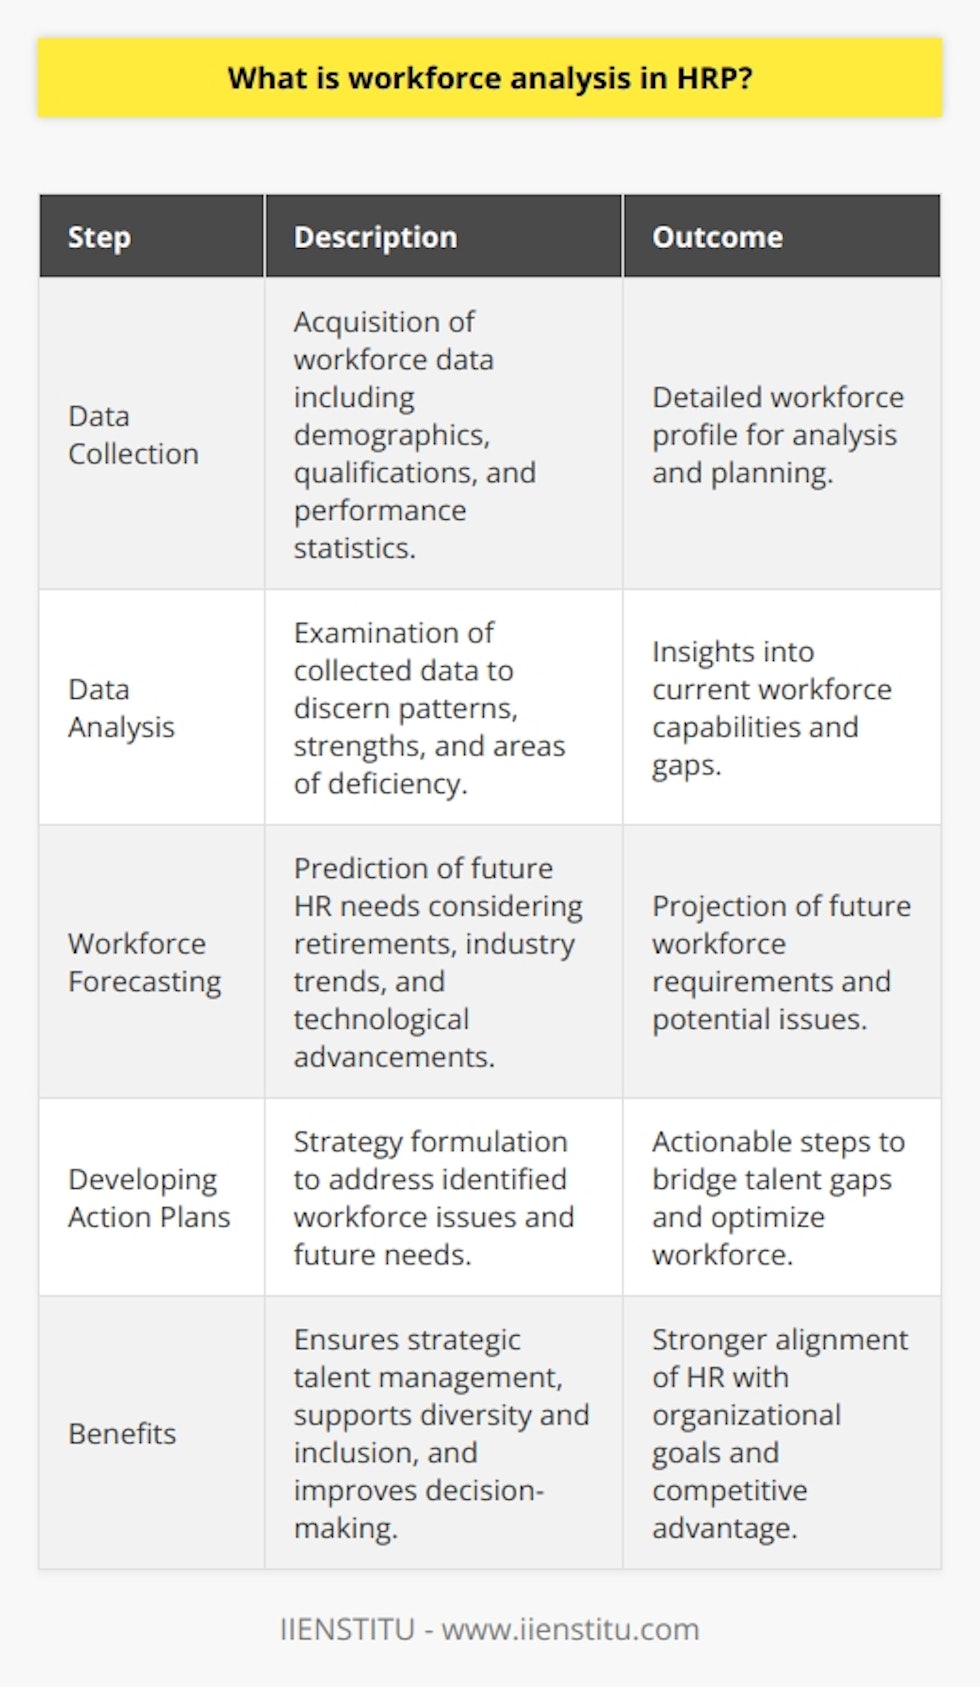 Workforce analysis in Human Resource Planning (HRP) is a key tool used to ensure that an organization's workforce aligns with its goals and objectives, both in the present and the future. It is a systematic approach that helps HR professionals understand the current composition of their workforce, assess human capital needs, and prepare for industry trends that may affect staffing.Key Steps of Workforce Analysis:1. Data Collection: The first step is the acquisition of detailed workforce data. This includes qualifications, age, gender, tenure, roles, performance data, and other relevant employment statistics. 2. Data Analysis: This step involves dissecting the acquired data to identify critical patterns and insights. Analysis can reveal areas where the workforce is strong and where there are deficiencies that need to be addressed, such as a shortage of specific skillsets.3. Workforce Forecasting: This predictive aspect of workforce analysis seeks to anticipate future human resource needs. Forecasting may consider impending retirements, industry growth patterns, and changes in technology that could impact the demand for certain jobs.4. Developing Action Plans: After identifying current and future workforce issues, HR must develop strategies to close the gaps. This could involve internal training programs, hiring initiatives, or strategic workforce shifts to optimize human resources.Benefits of Workforce Analysis in HRP:Workforce analysis helps organizations make informed decisions about hiring, training, and development. By understanding the demands of the current and future business environment, organizations can proactively respond to changes rather than reactively scrambling to fill talent gaps.It enables strategic talent management, which is critical in acquiring and maintaining a competitive edge in the marketplace. Thorough workforce analysis ensures that the right people with the right skills are in the right positions at the right time.Moreover, workforce analysis underpins diversity and inclusion efforts. With detailed data on the existing workforce, organizations can identify areas lacking in diversity and work toward rectifying those imbalances, thus improving both the workplace culture and the bottom line.Challenges and Limitations:A major challenge in workforce analysis is the reliance on the quality of the data collected. If data isn't accurate or is outdated, it can lead to incorrect analyses and poor decision-making. Forecasting involves a degree of uncertainty, especially in volatile economic climates or rapidly changing industries. It requires not just analysis but also educated guesses about future trends and events.Workforce analysis is an indispensable aspect of strategic HRP and offers numerous benefits from improved decision-making to better talent management and enhanced strategic alignment. When effectively executed, it provides a roadmap for HR to develop a resilient, agile, and diverse workforce capable of meeting the organization's goals and adapting to future challenges.